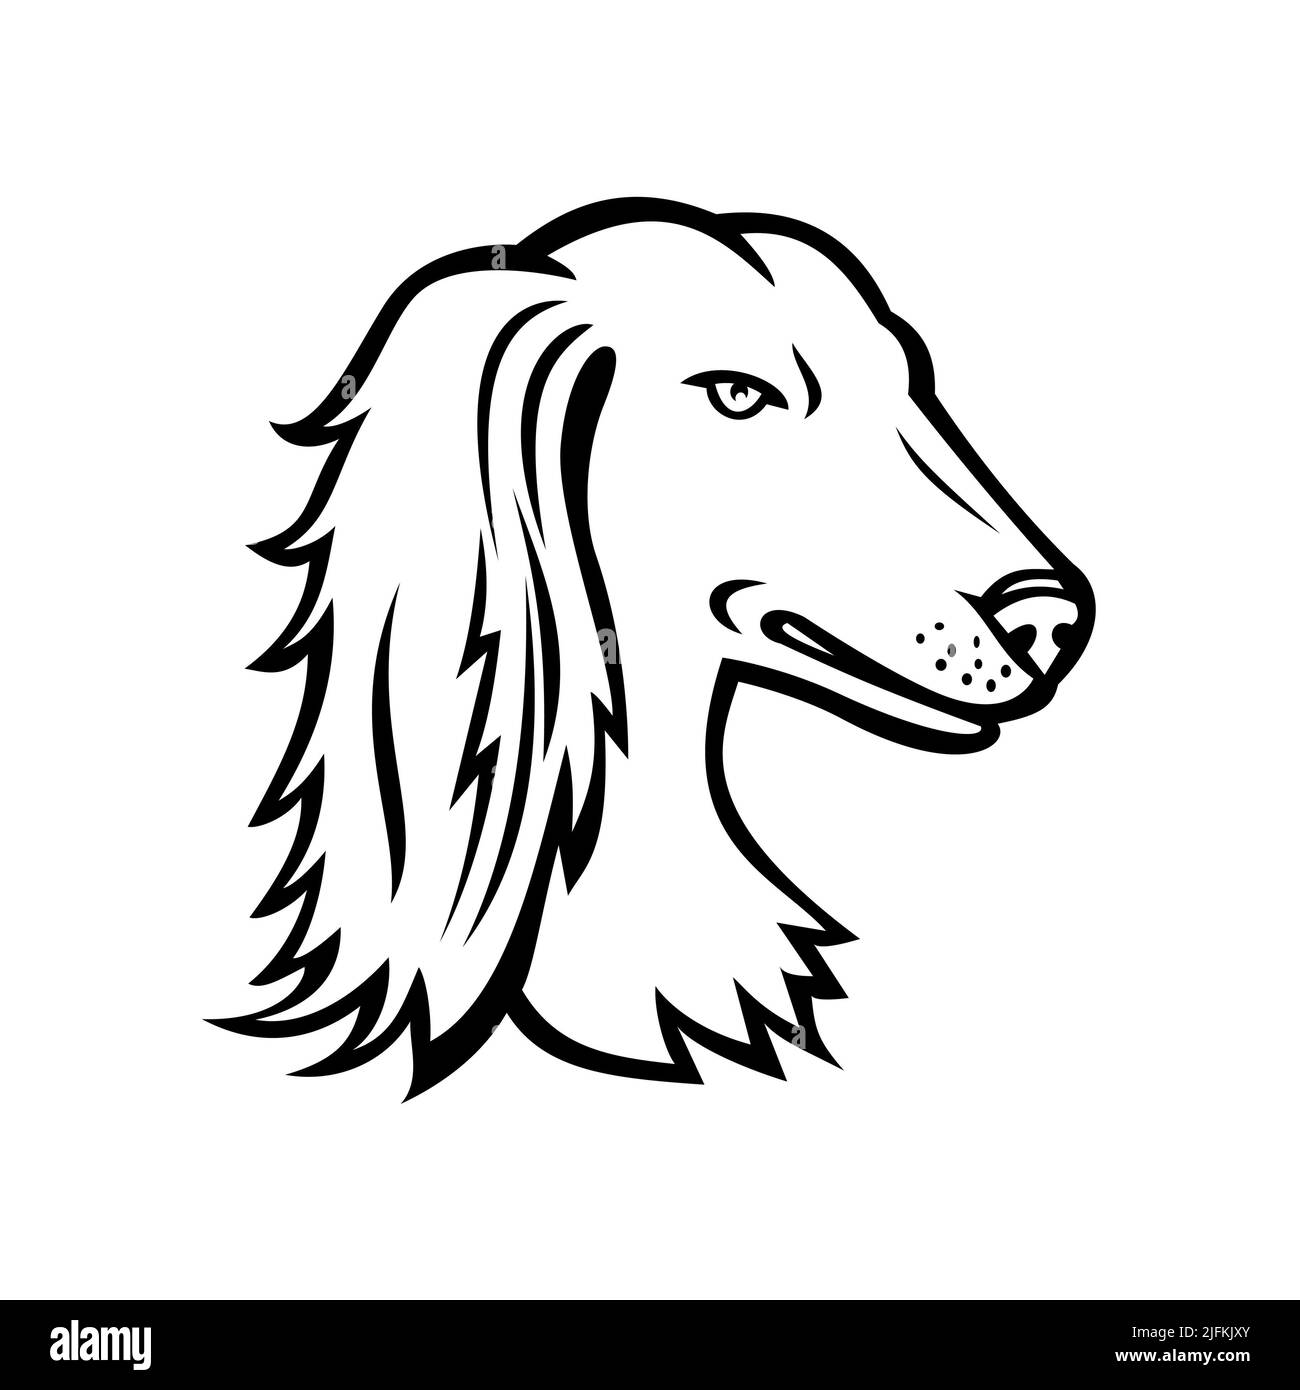 Mascot icon illustration of head of a Saluki, also known as Persian Greyhound or Tazi, a dog breed classed as a sighthound on isolated background in Stock Photo